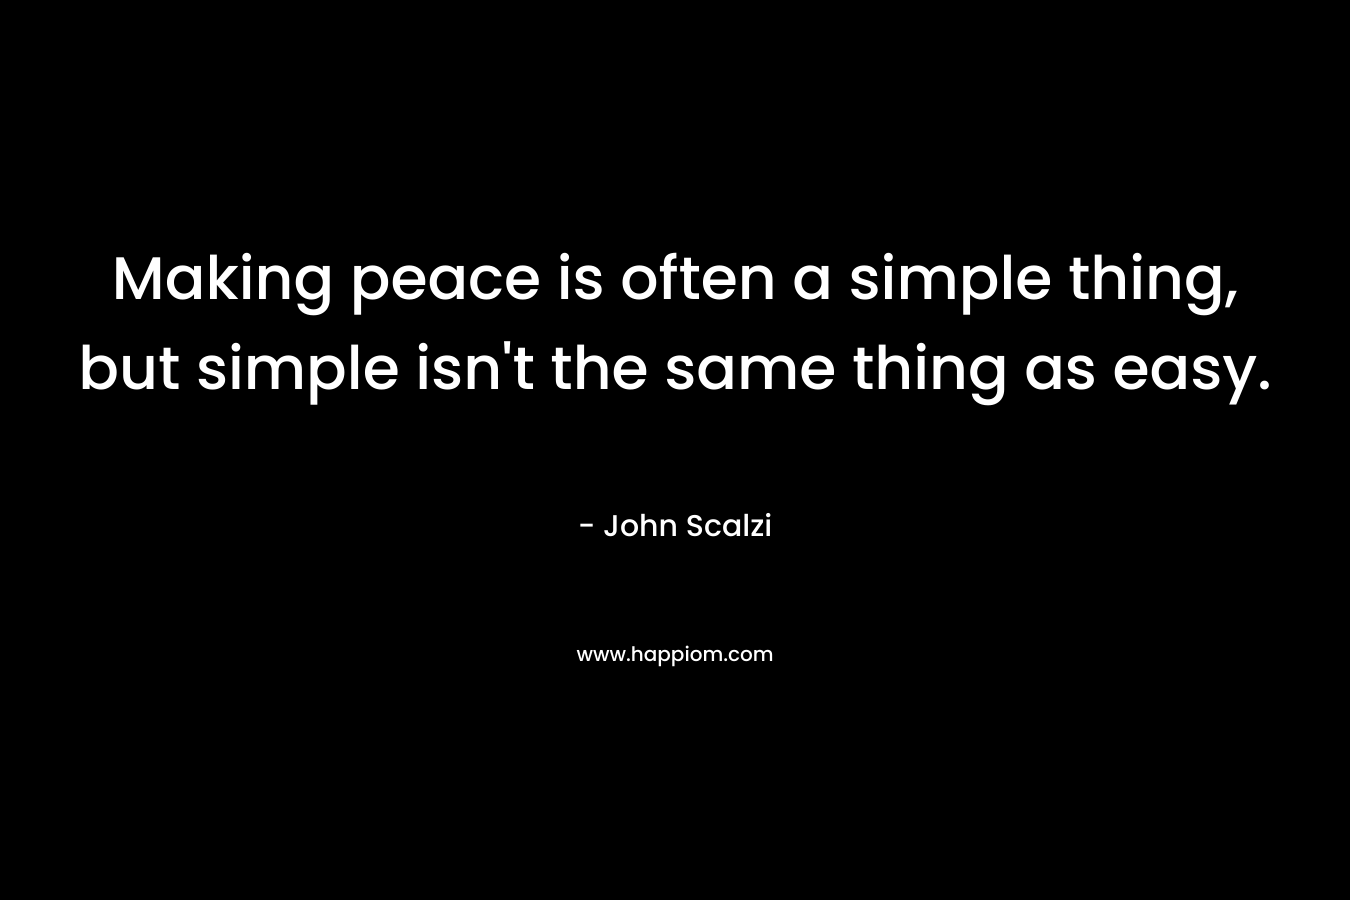 Making peace is often a simple thing, but simple isn't the same thing as easy.